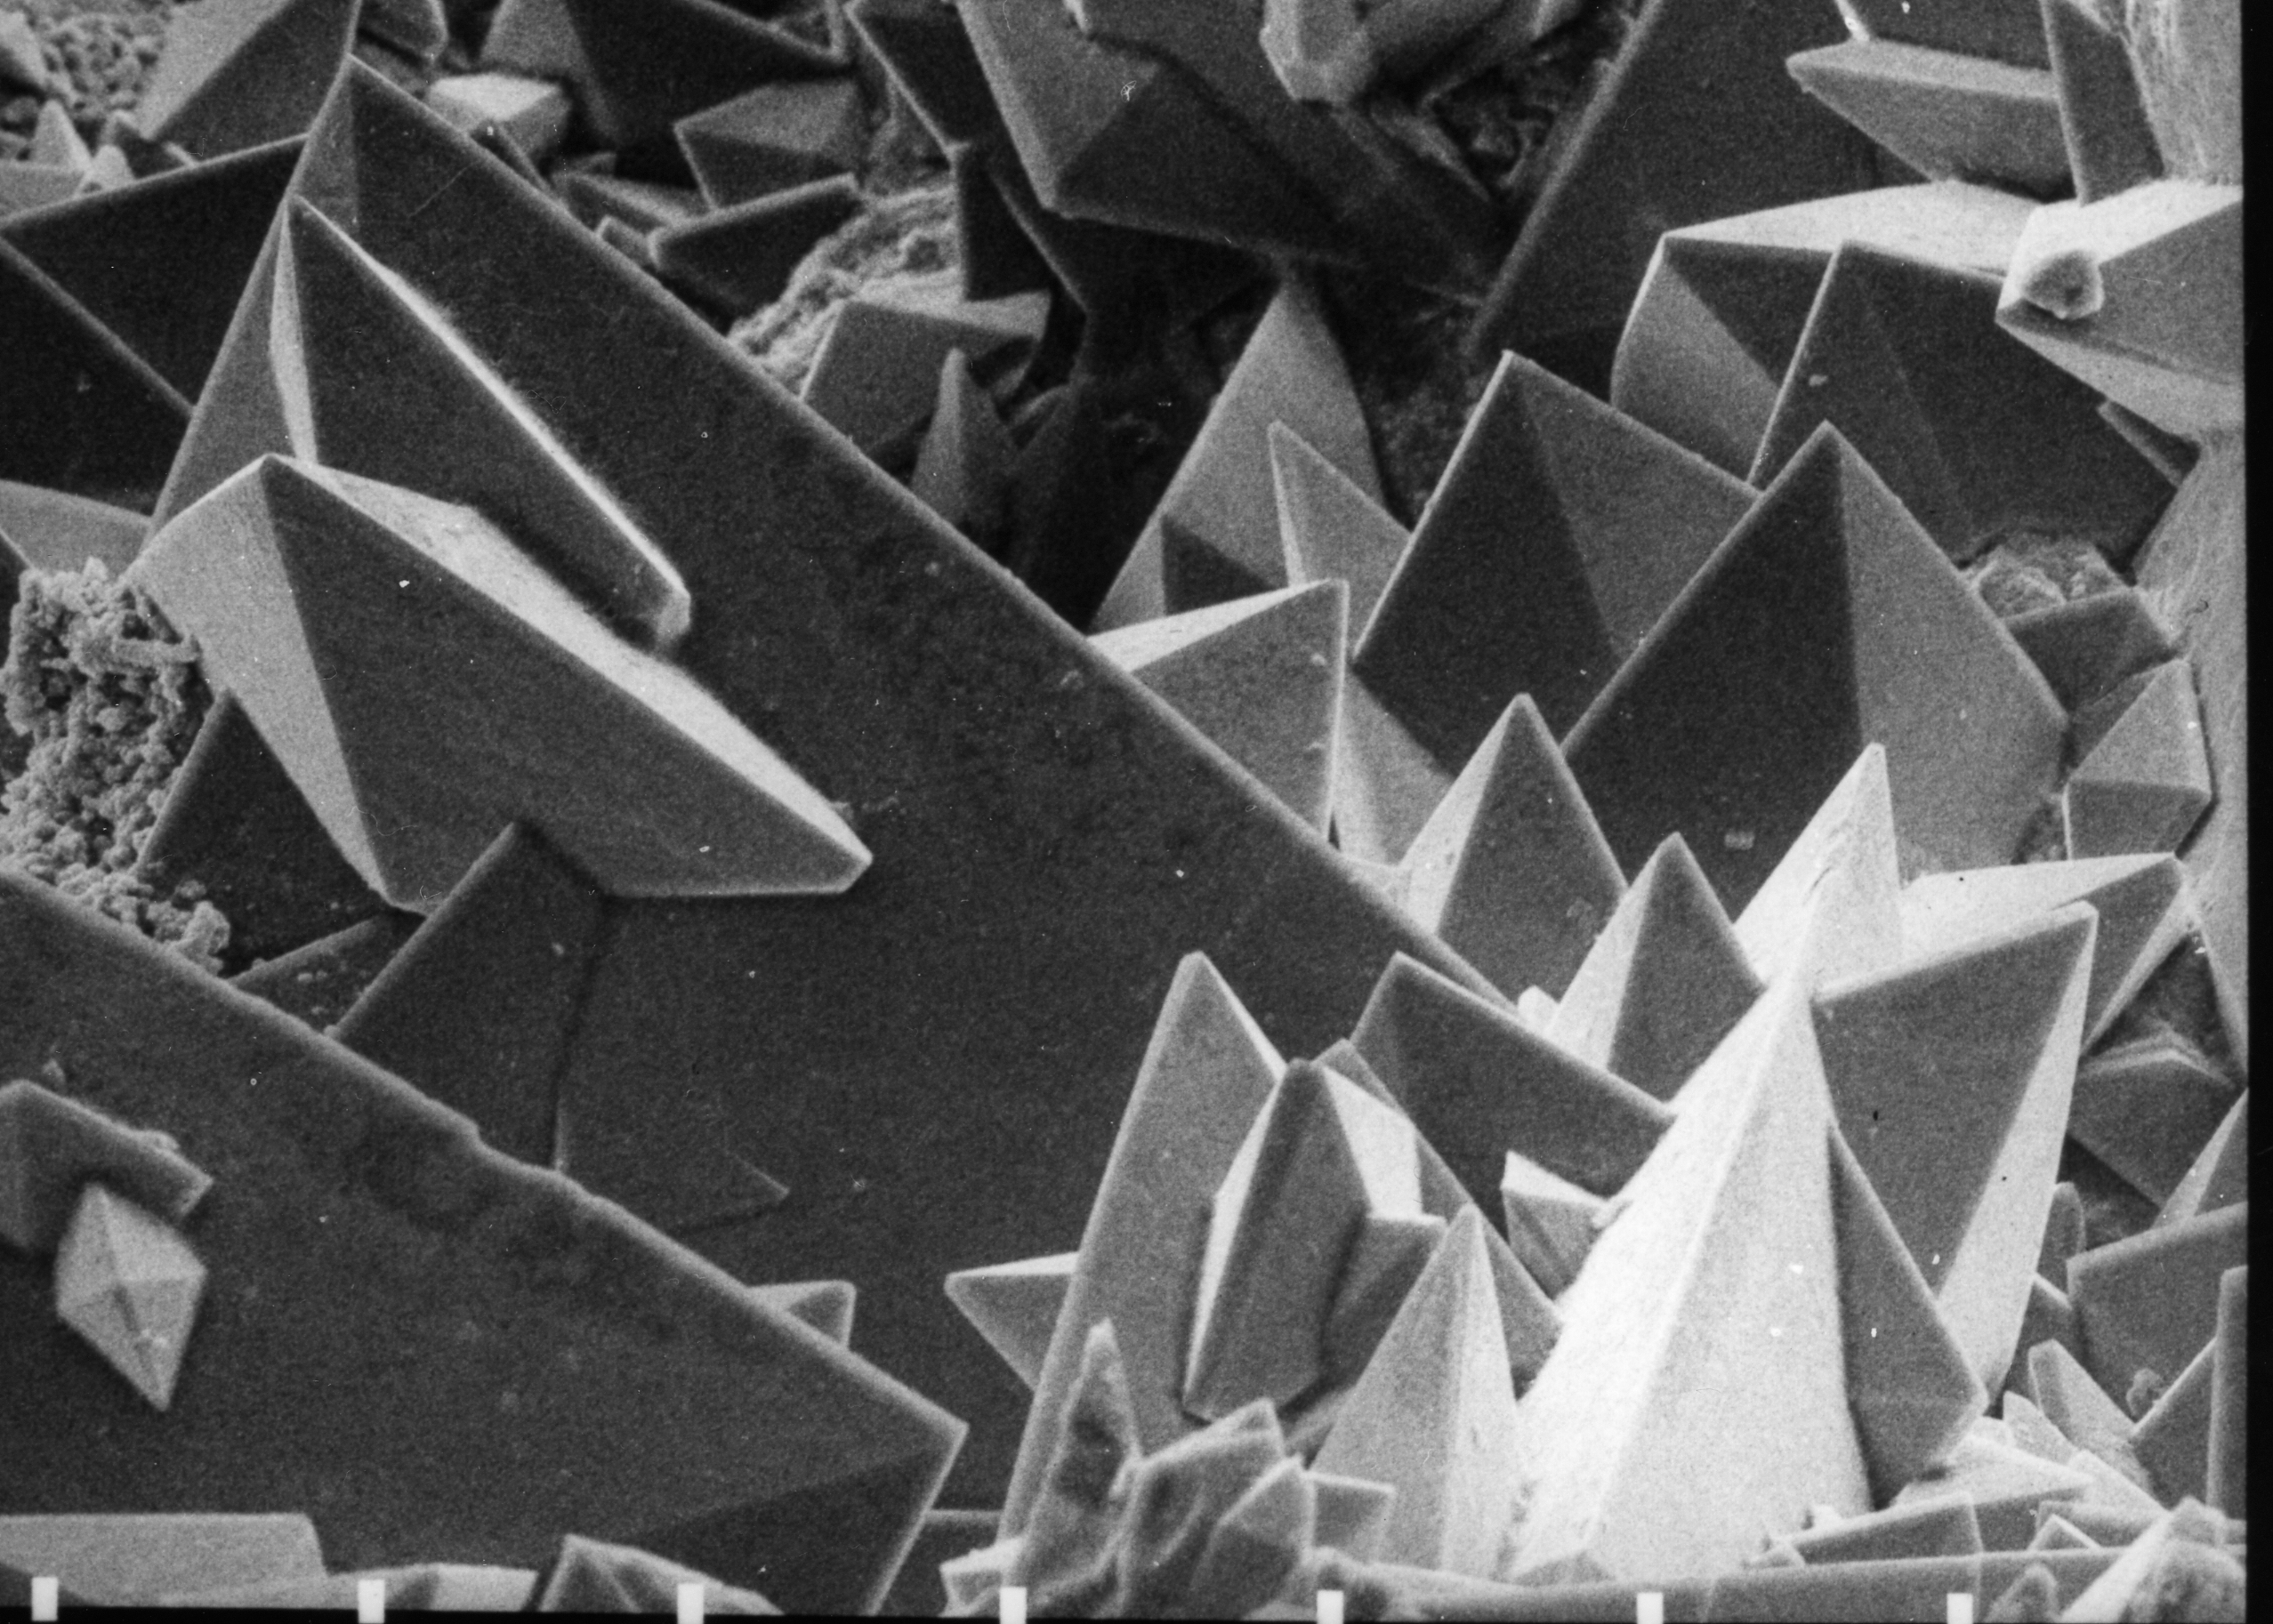 Calcium oxalate dihydrate crystals under Scanning Electron Micrograph (SEM) taken at 30 KV. Source: Wikimedia commons[12]